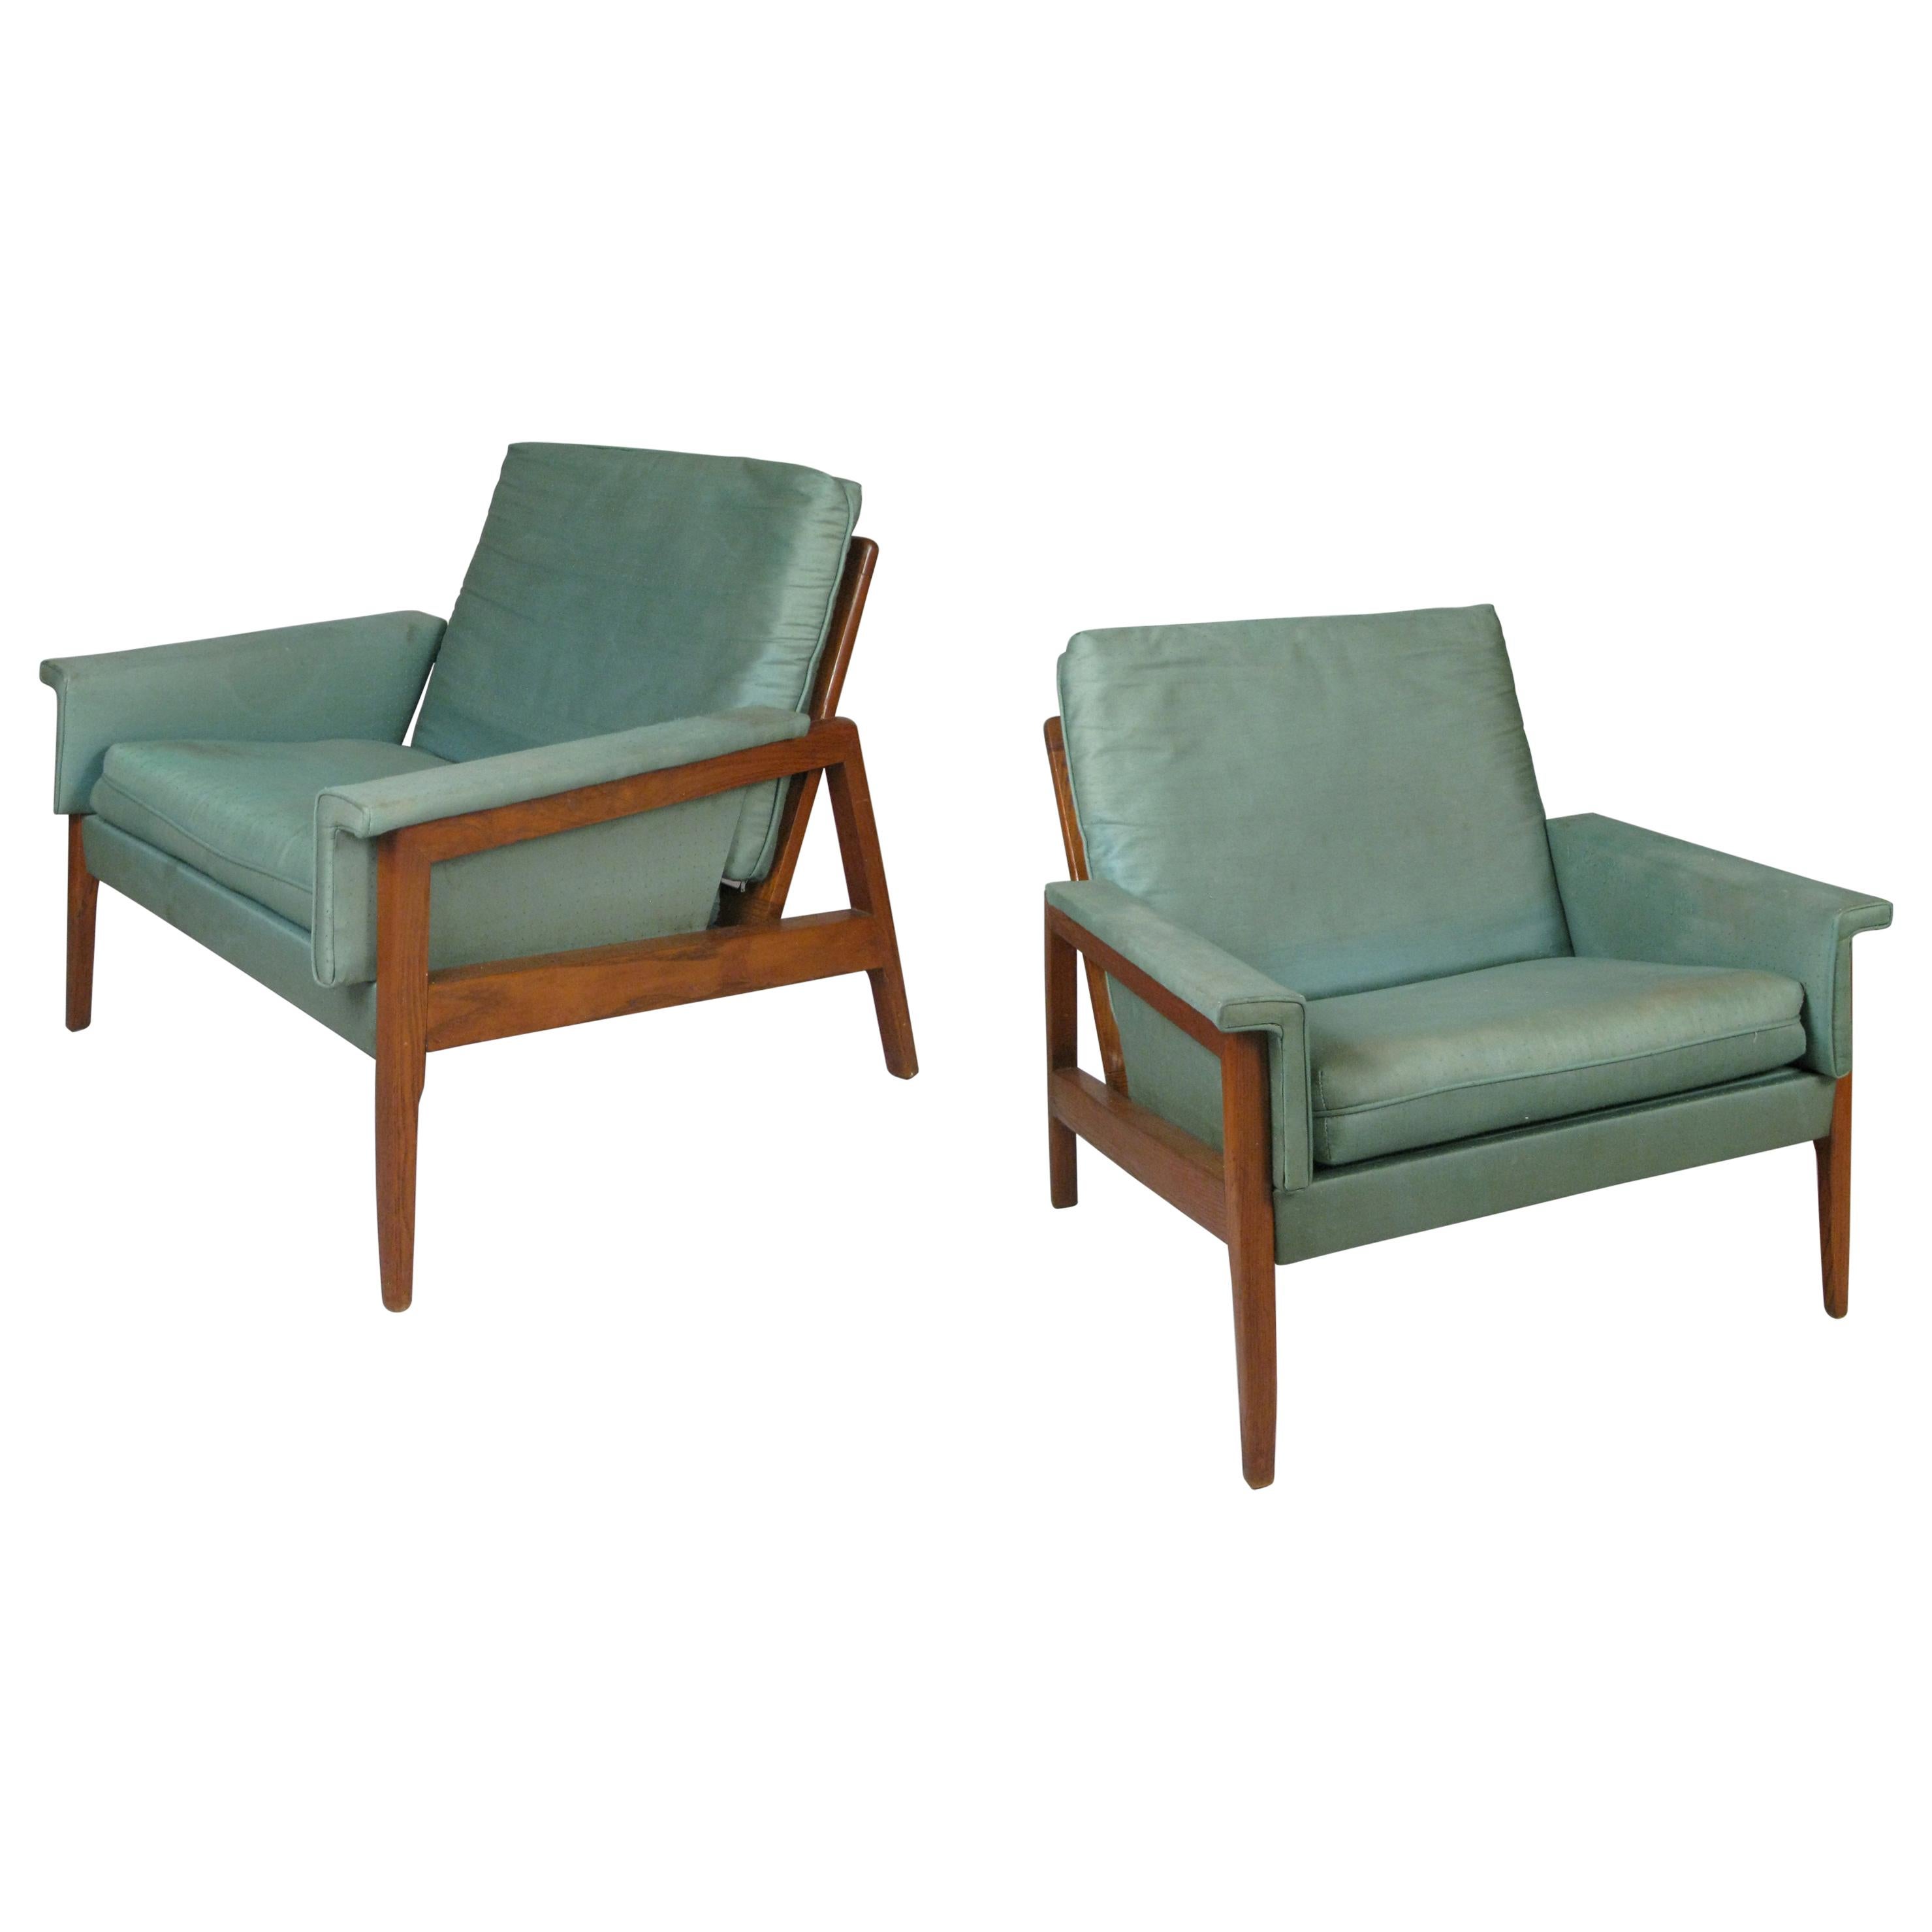 Pair of 1950s Walnut Lounge Chairs